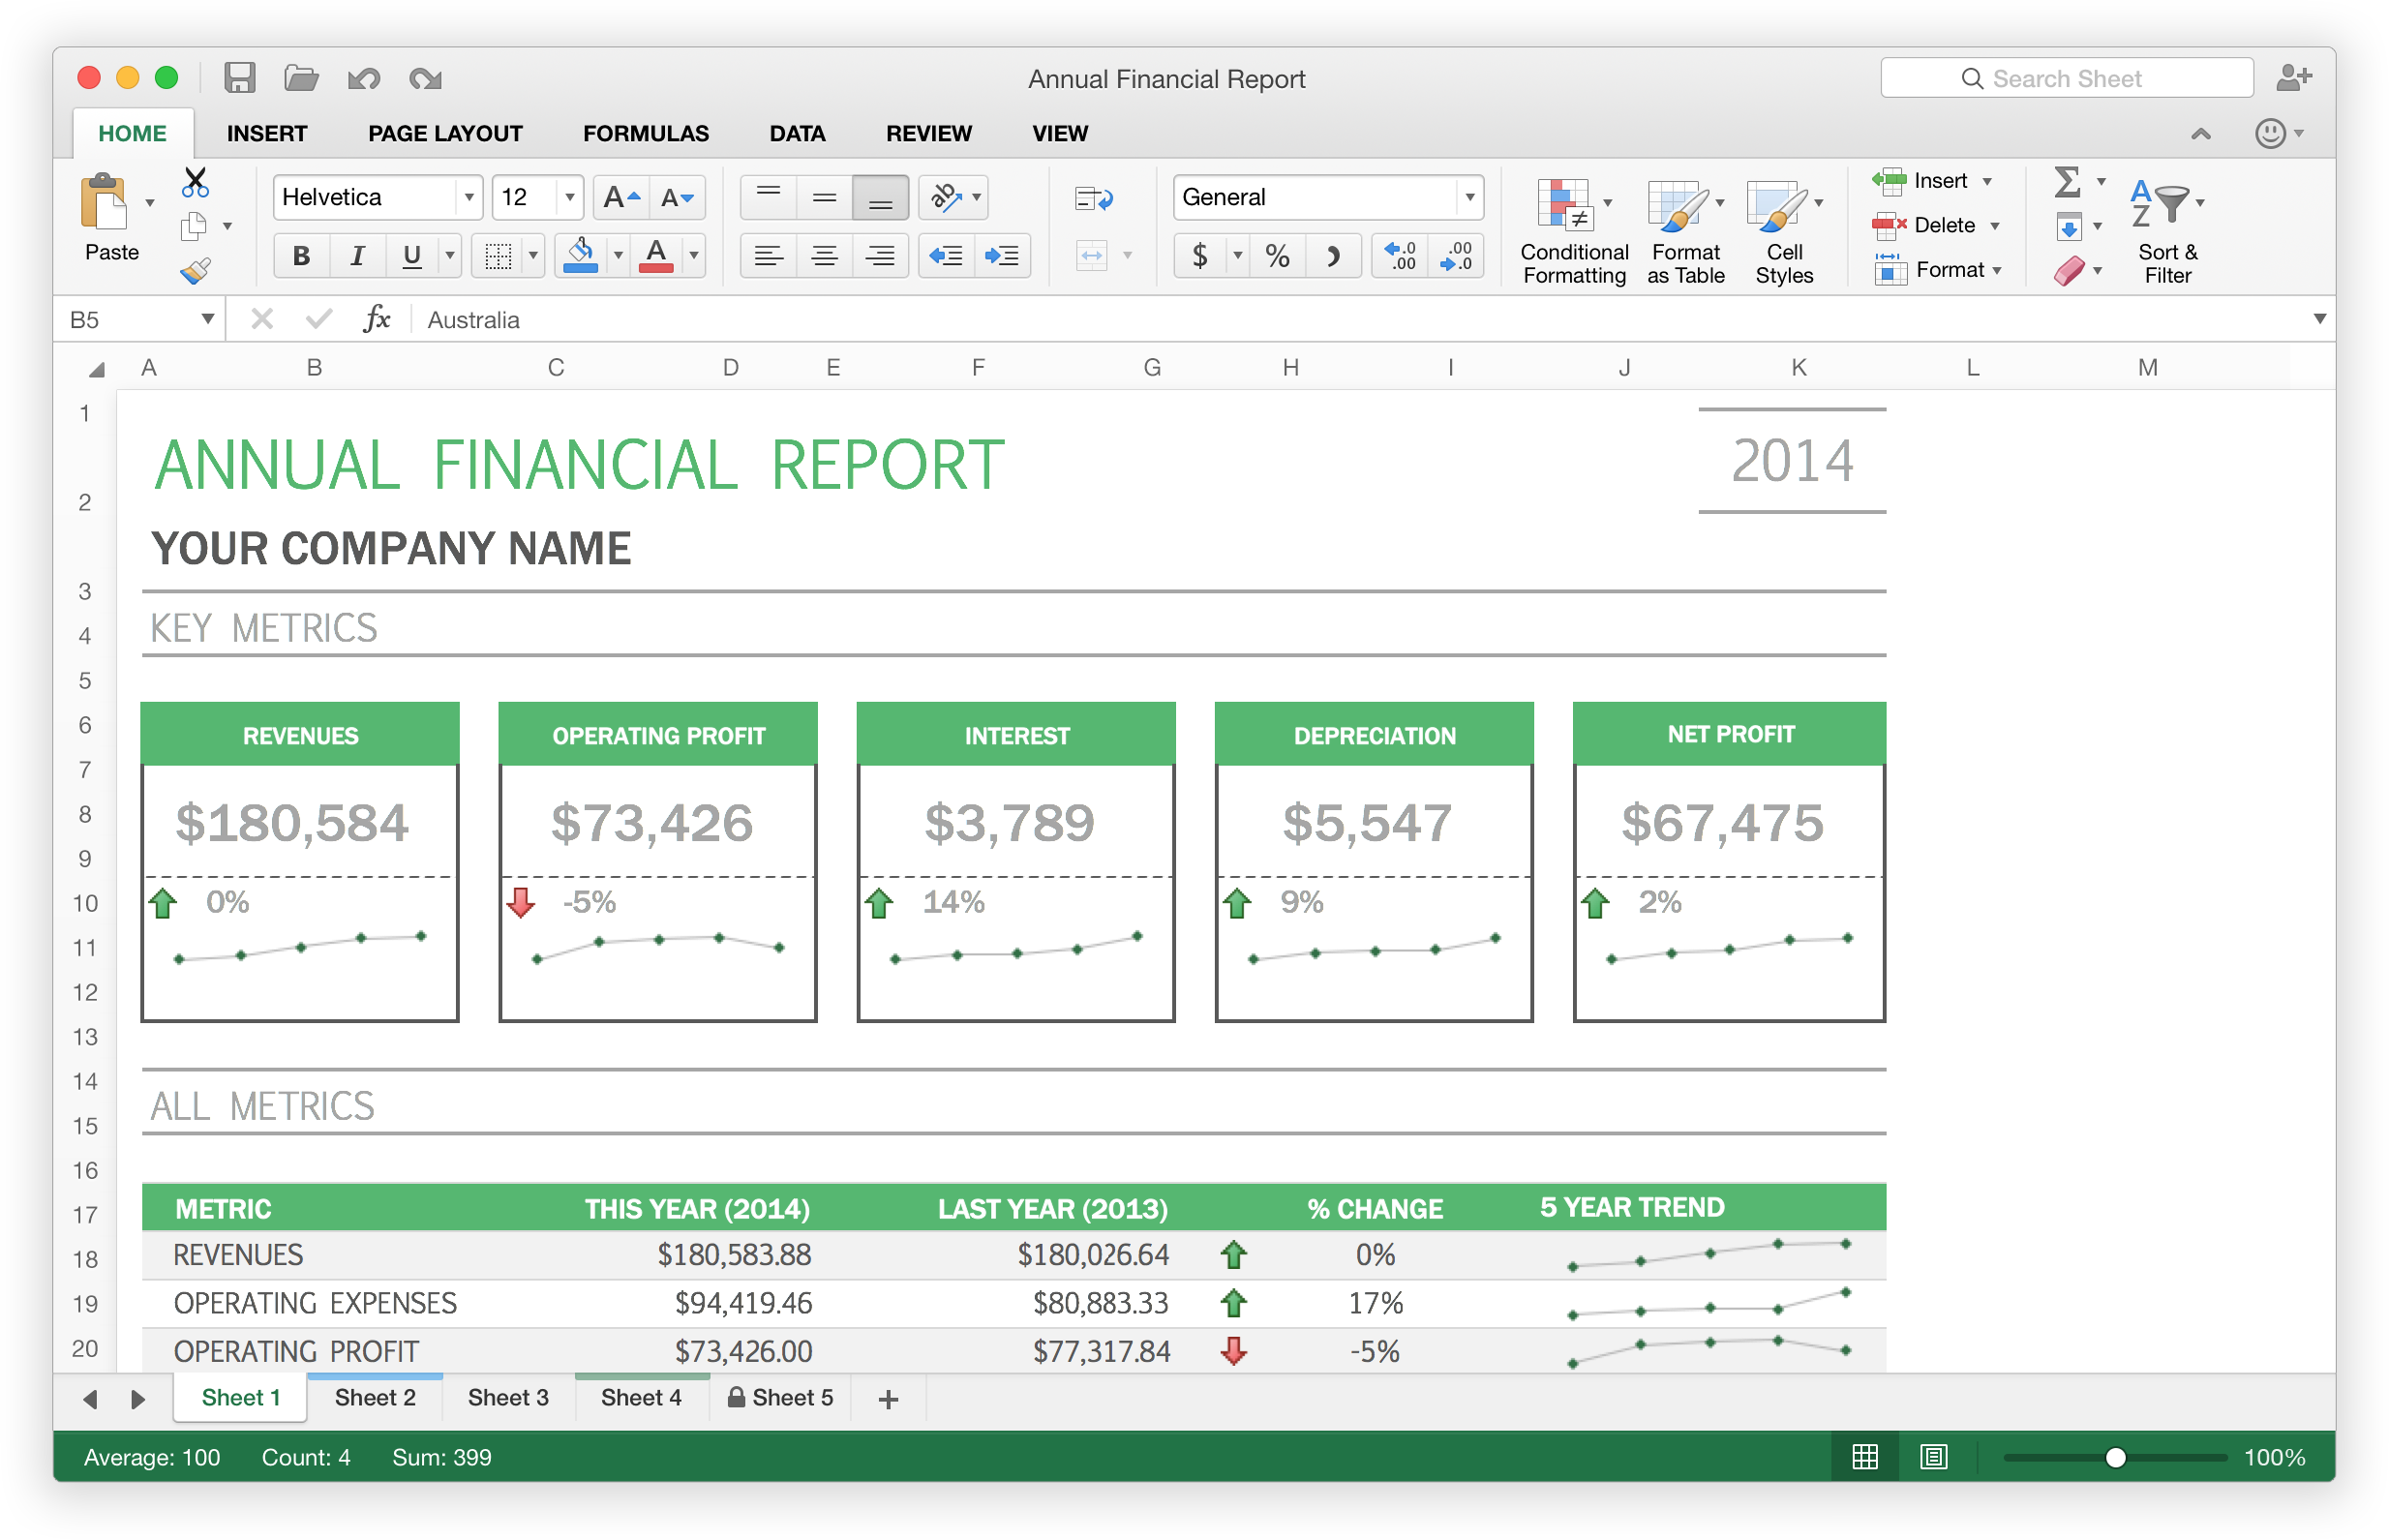 get microsoft office 2016 for mac for free